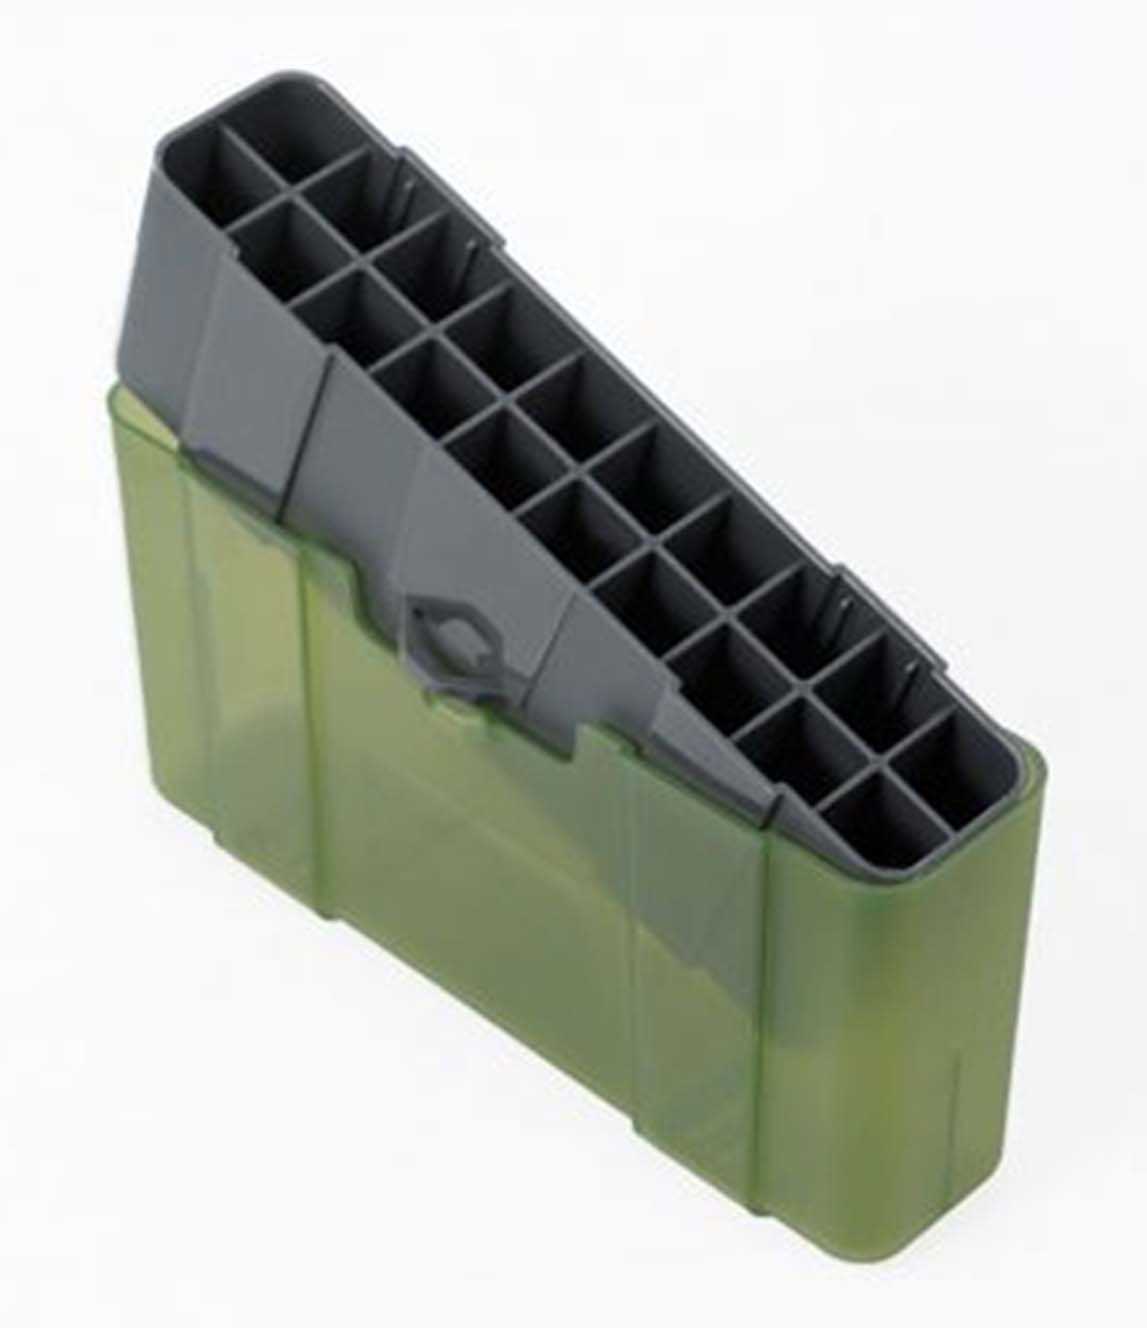 Plano Ammunition Box Holds 20 Rounds Of .30-06/7mm Mag/.338/.340 Rifle Charcoal/Green 6 Pack 1230-20